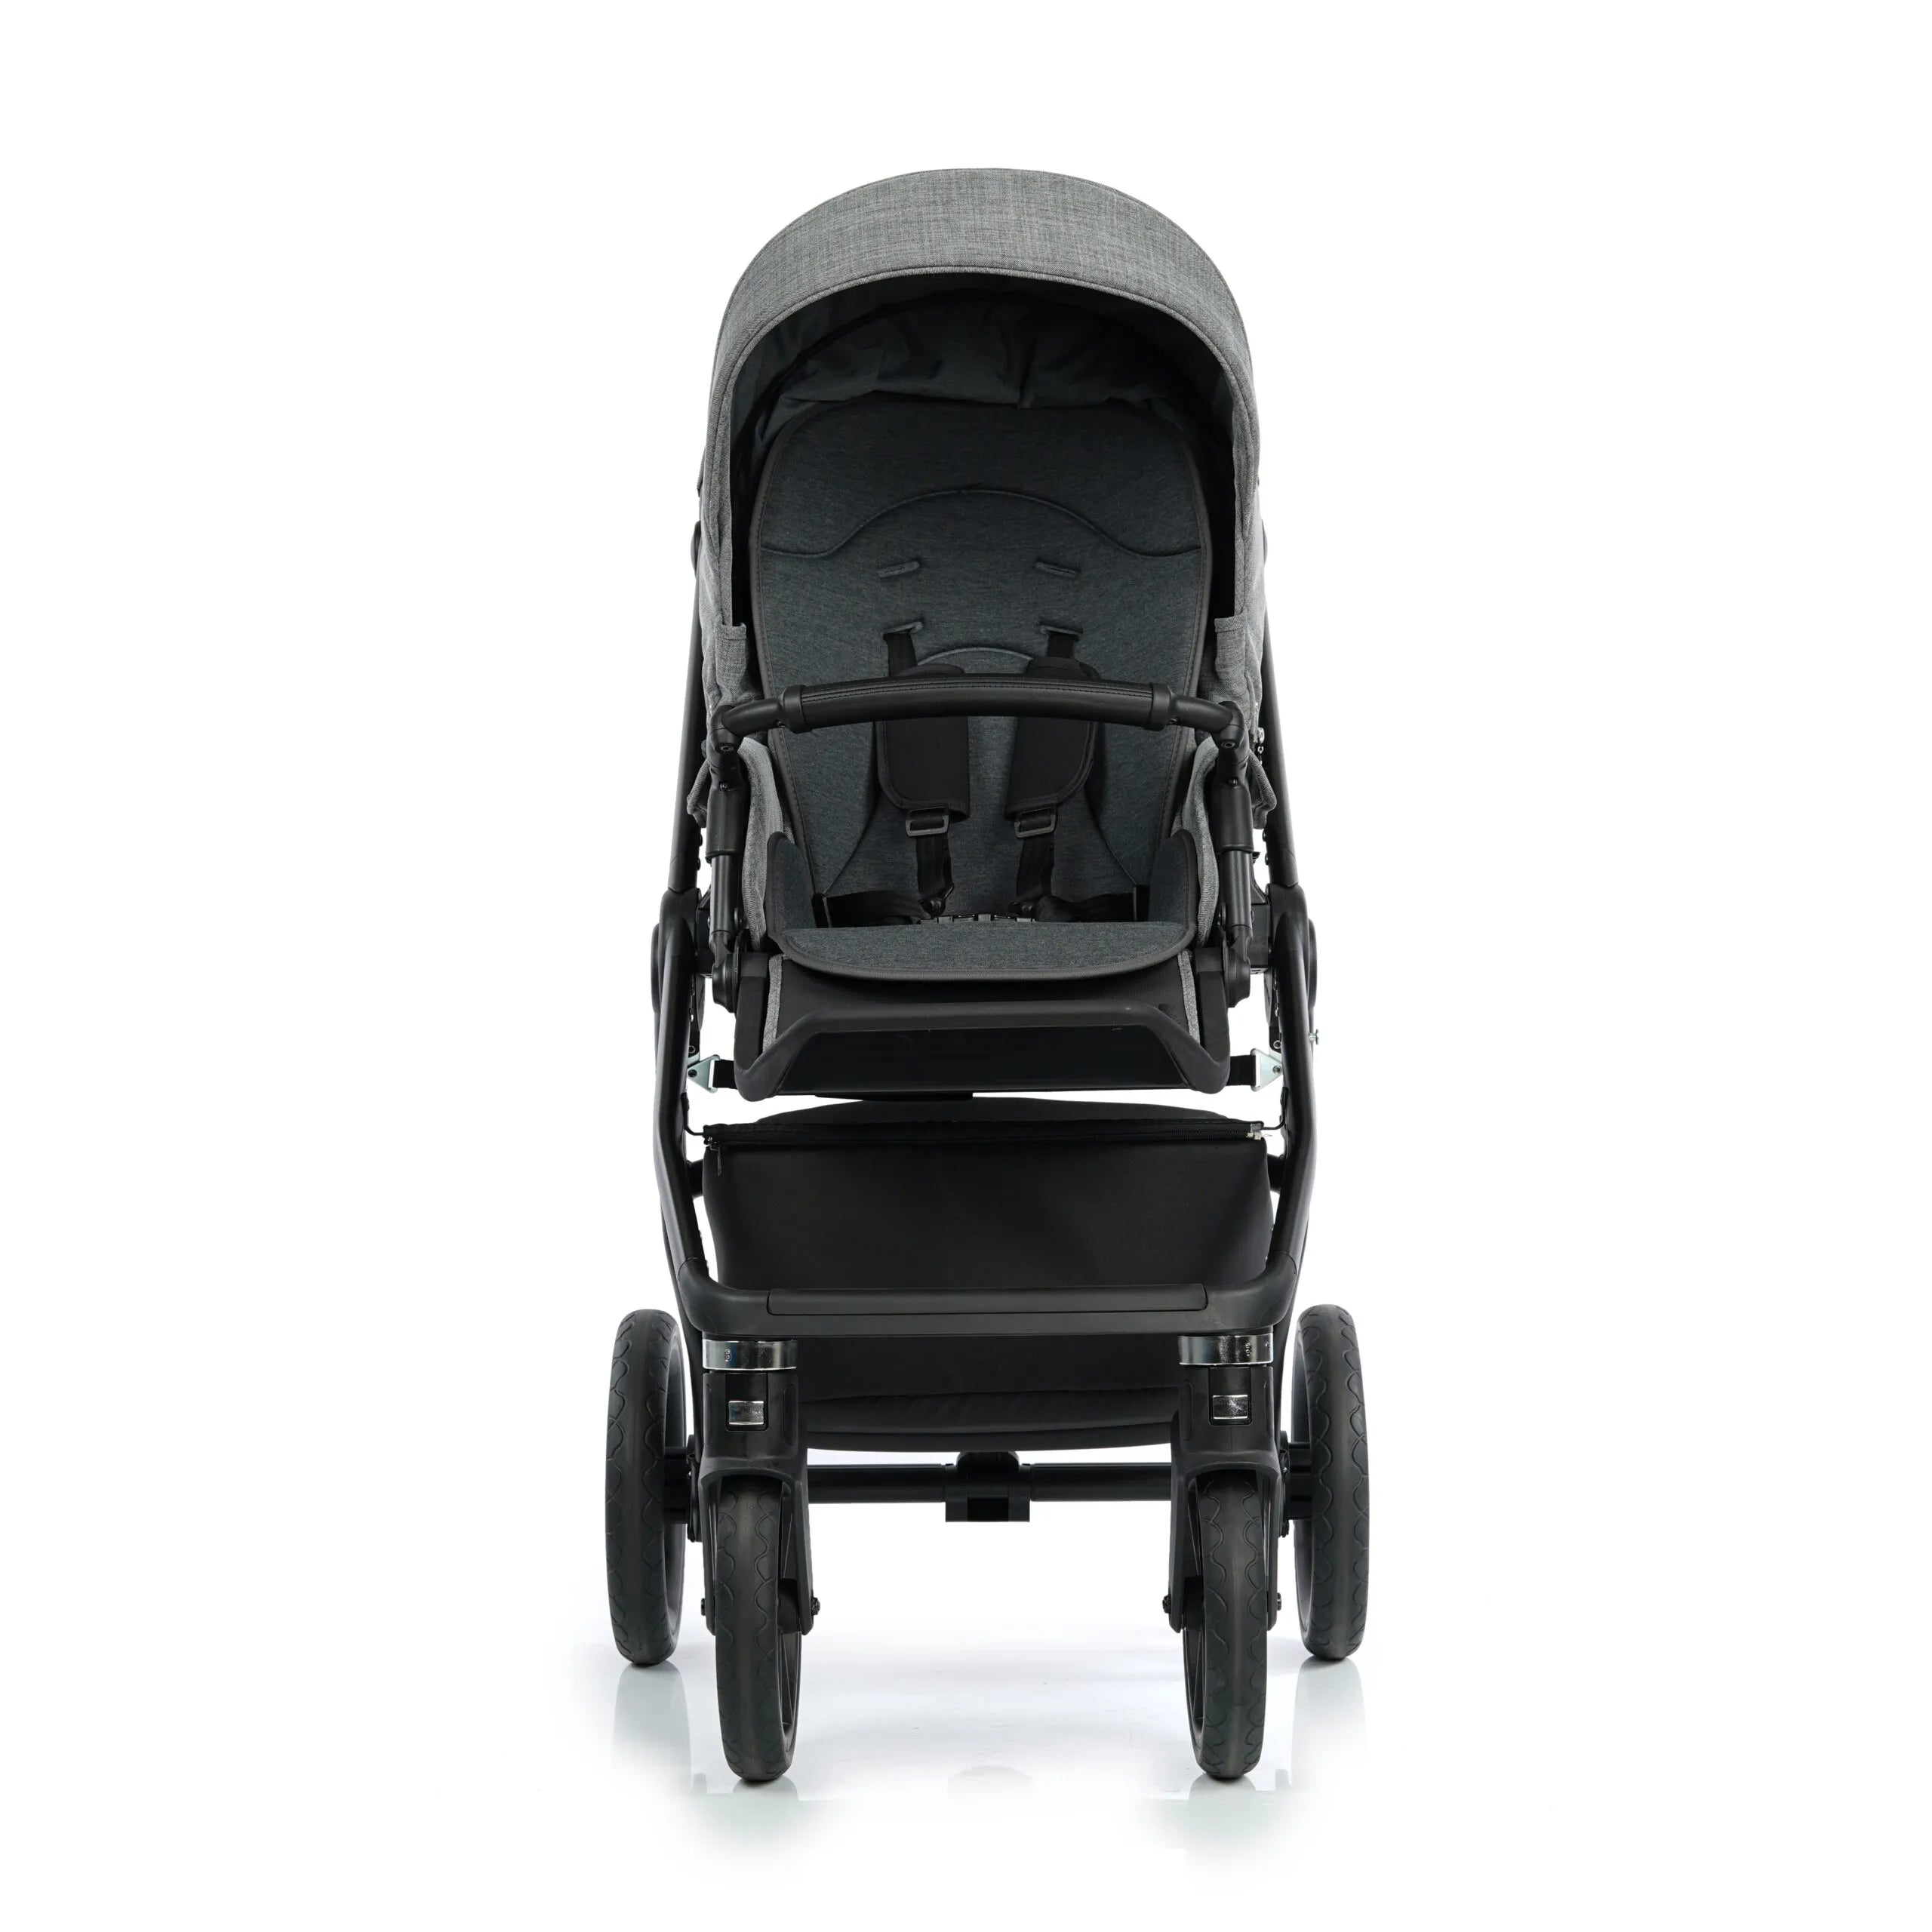 Roan COSS baby stroller carry cot and stroller, color Titanium